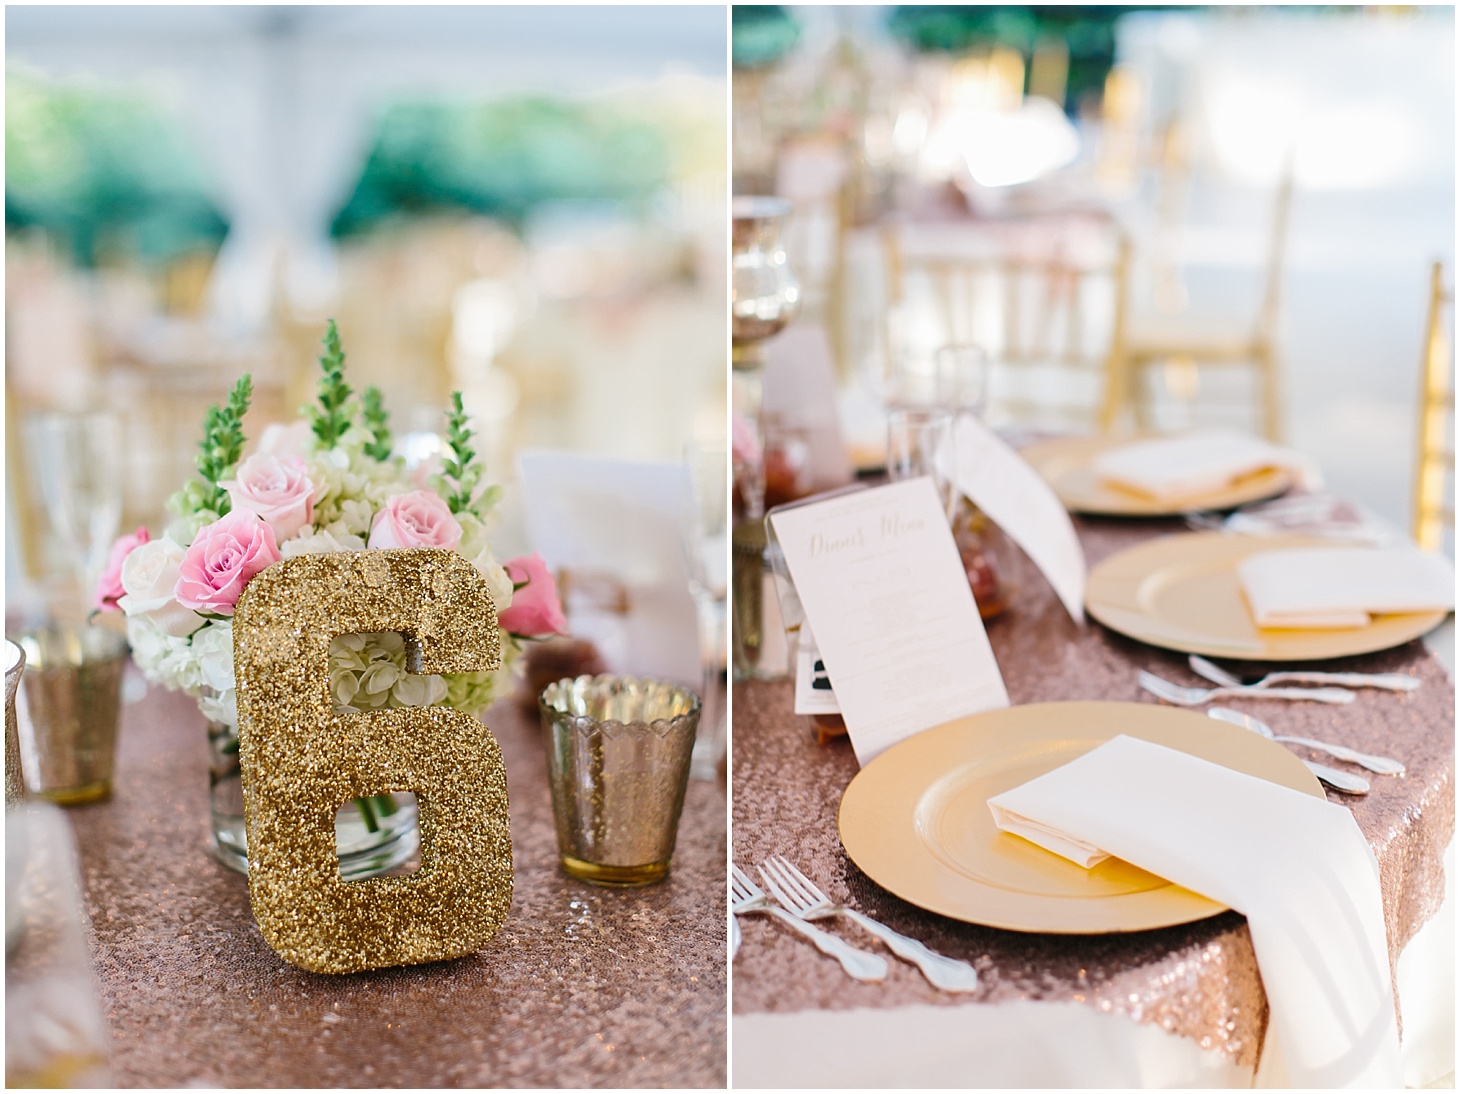 Classic Southern Rust Manor House Wedding